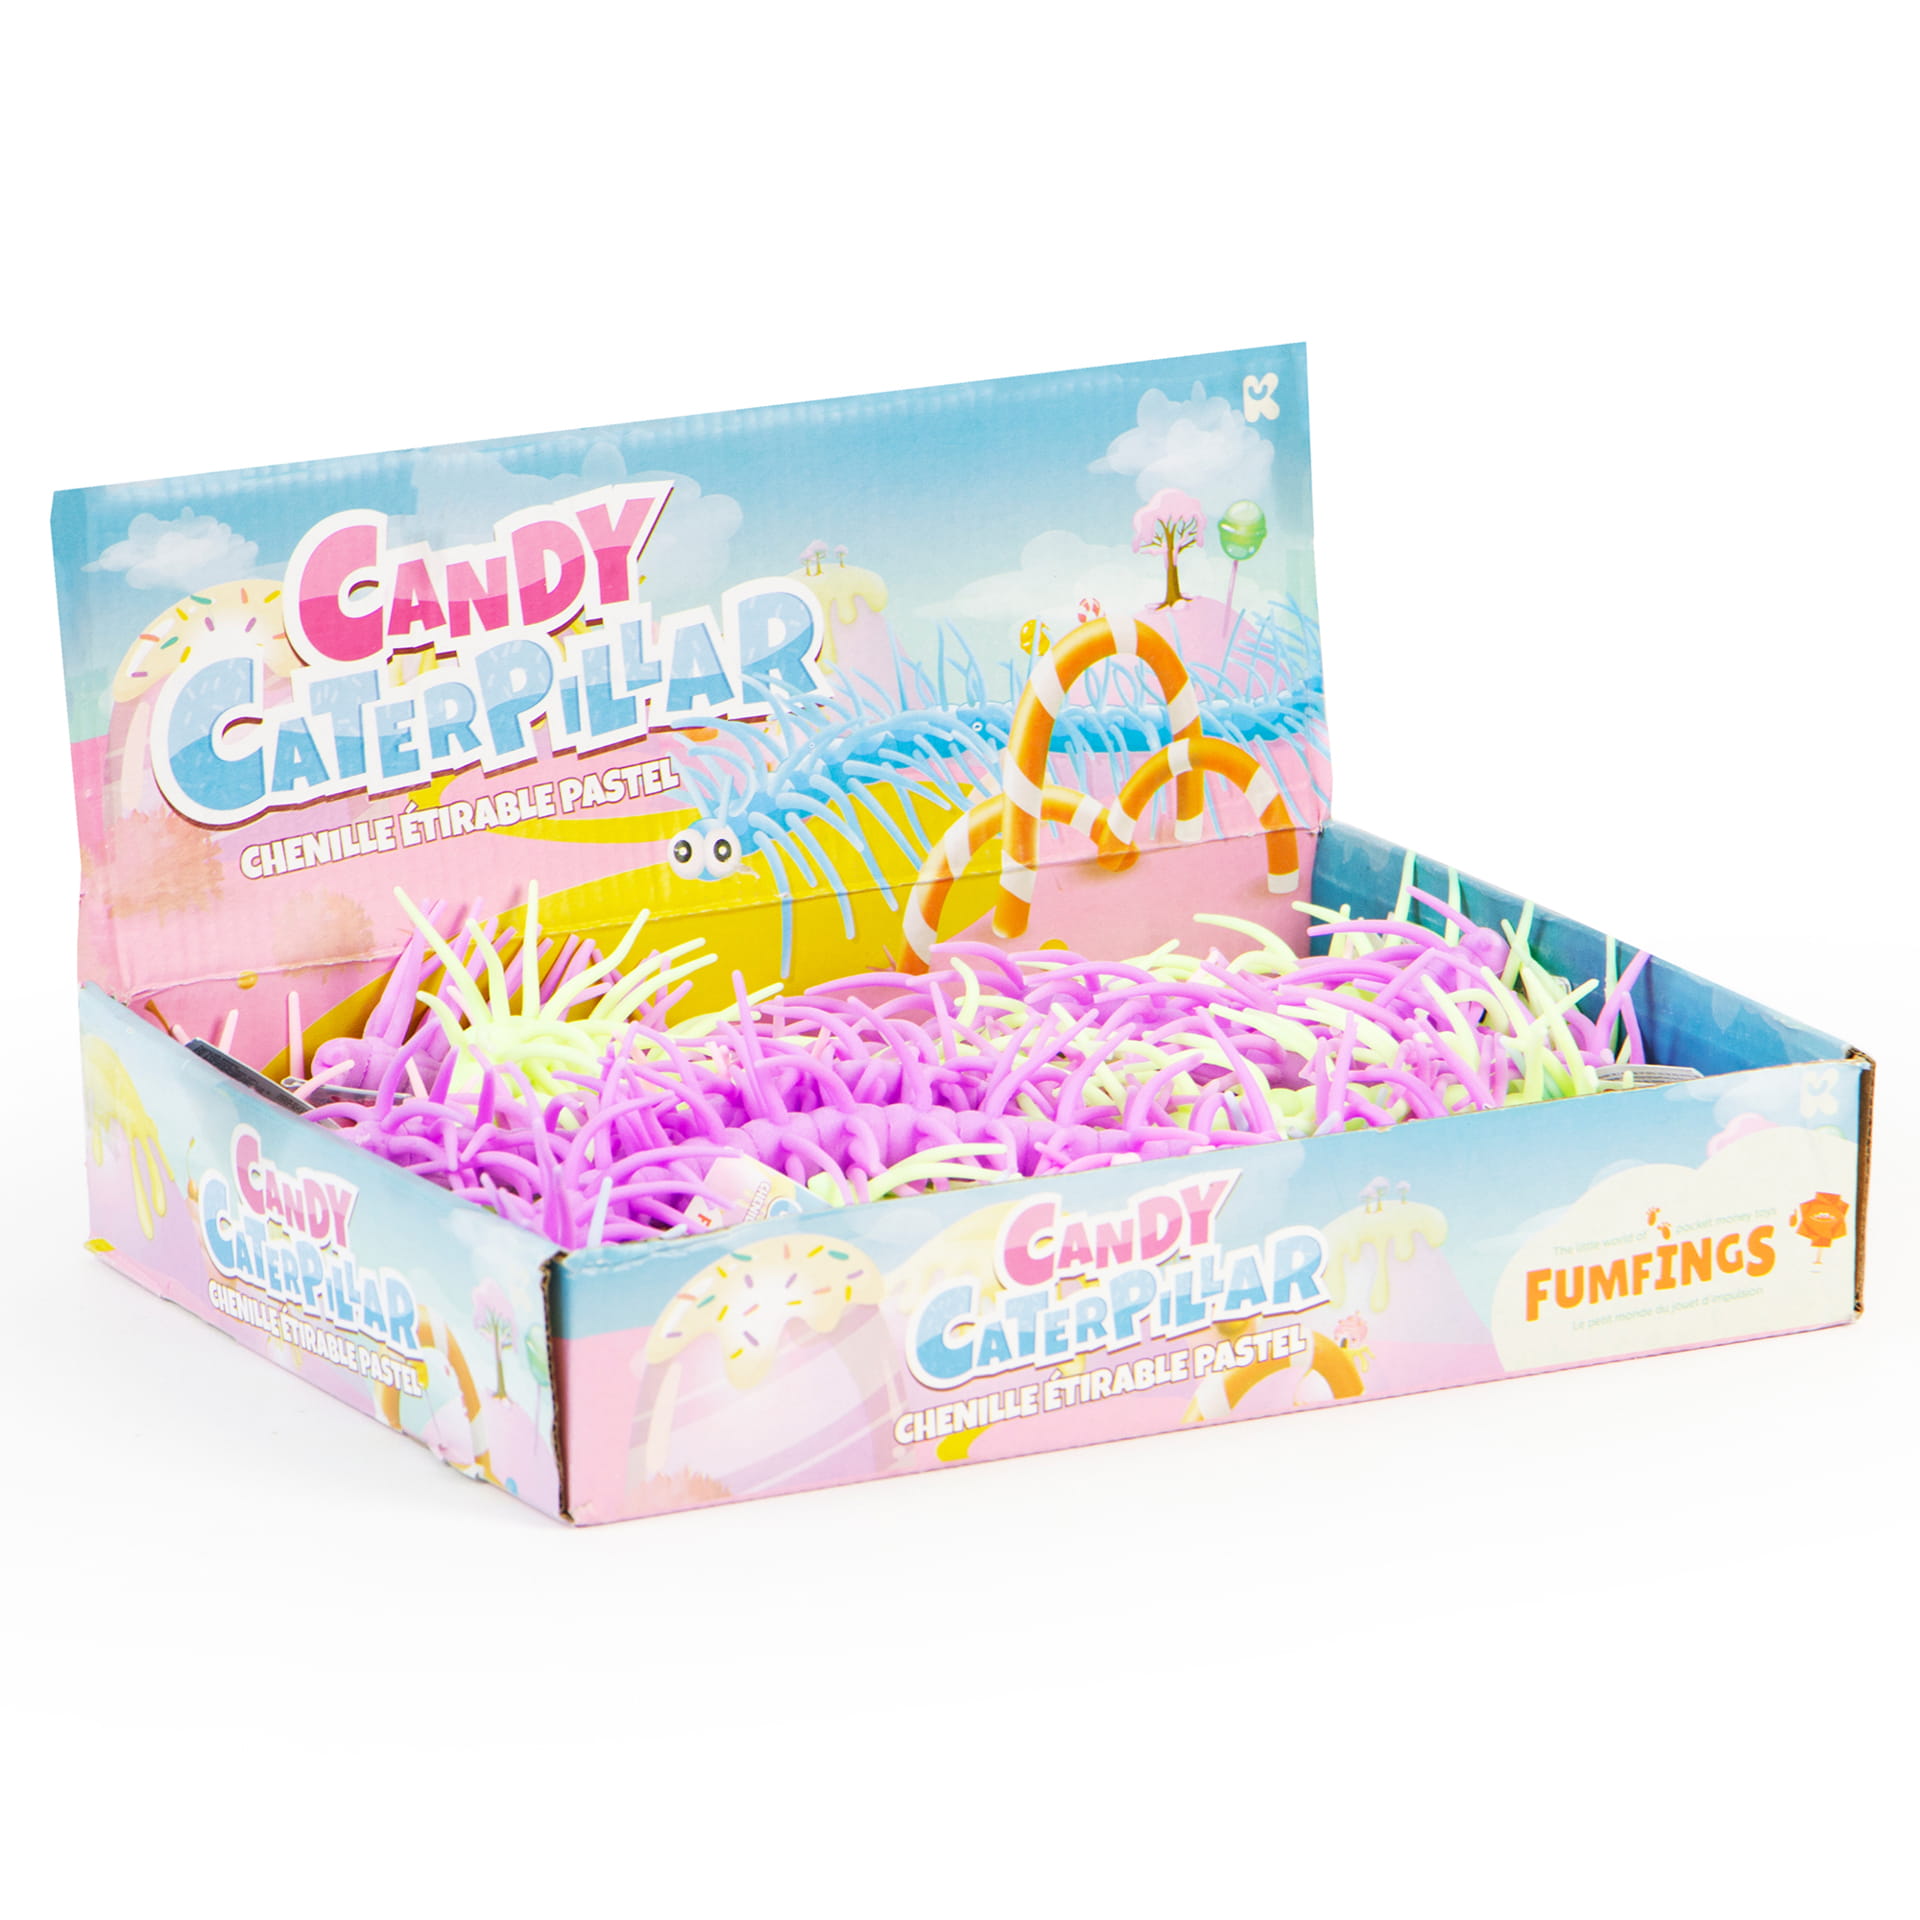 Fumfings Candy Caterpillars